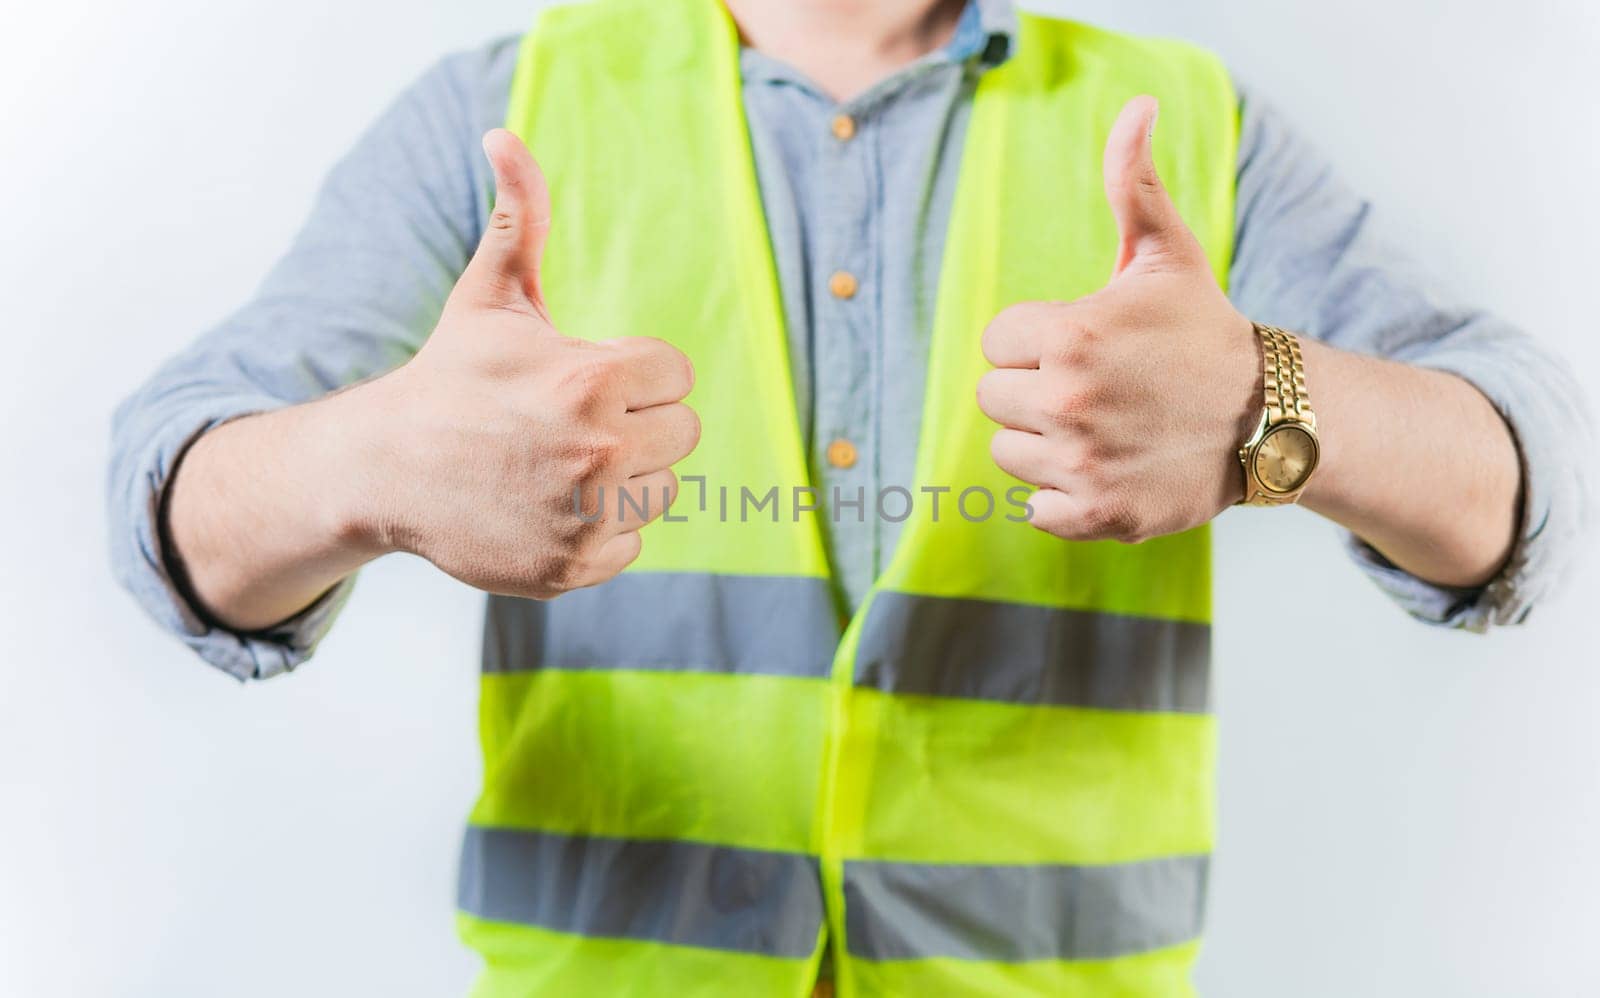 Engineer hands with thumbs up in approval gesture isolated. Engineer thumbs up in approval gesture on isolated background by isaiphoto